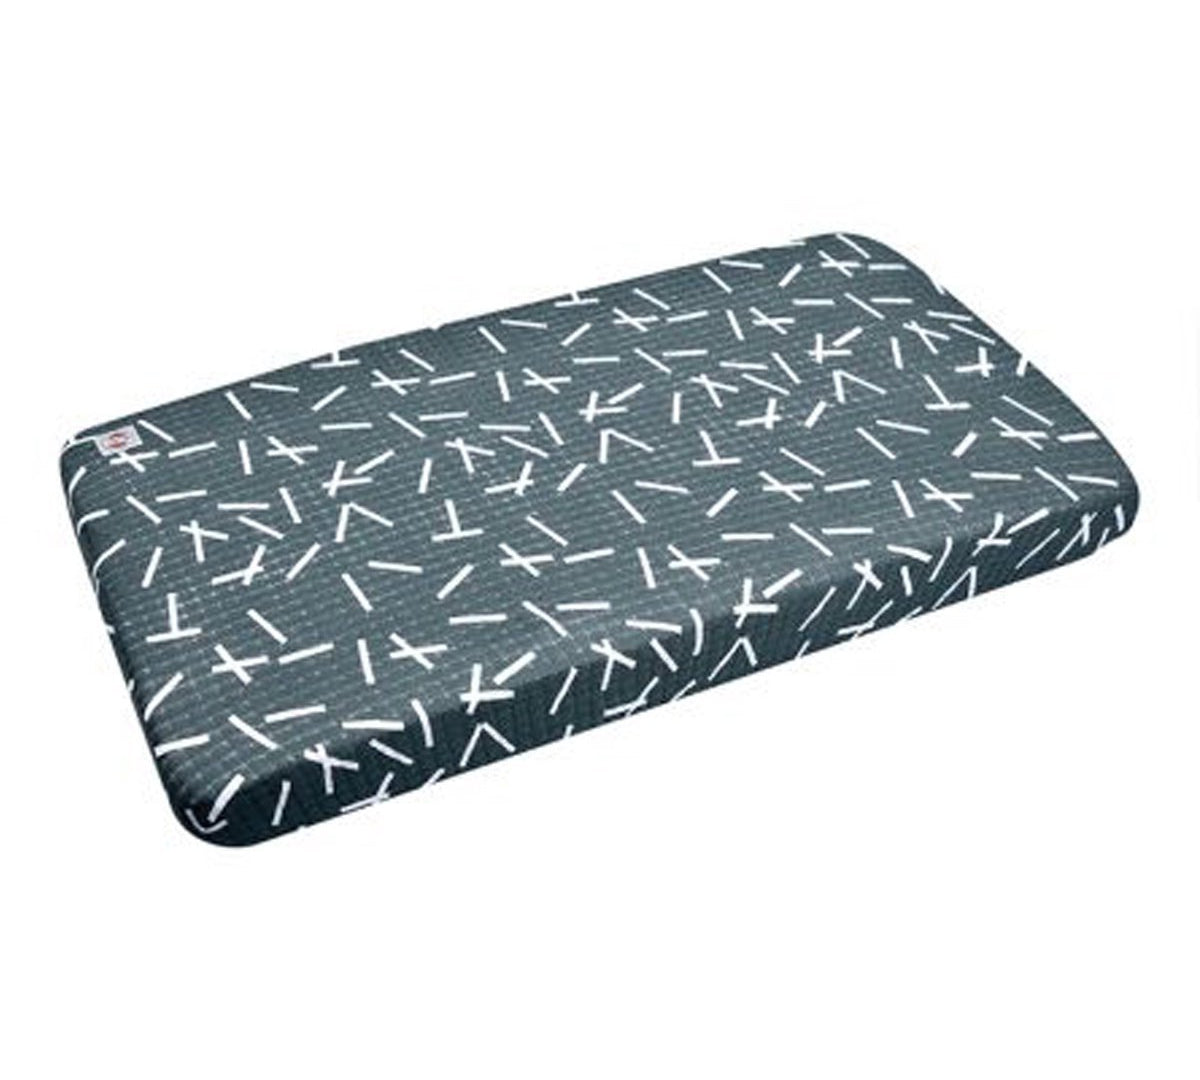 Deer Industries nursery bedding Lodger Slumber Carbon. Black and white monochrome Soft knitted cotton fitted sheet for cot or cot bed. Breathable, comfortable and absorbent baby bedding. 